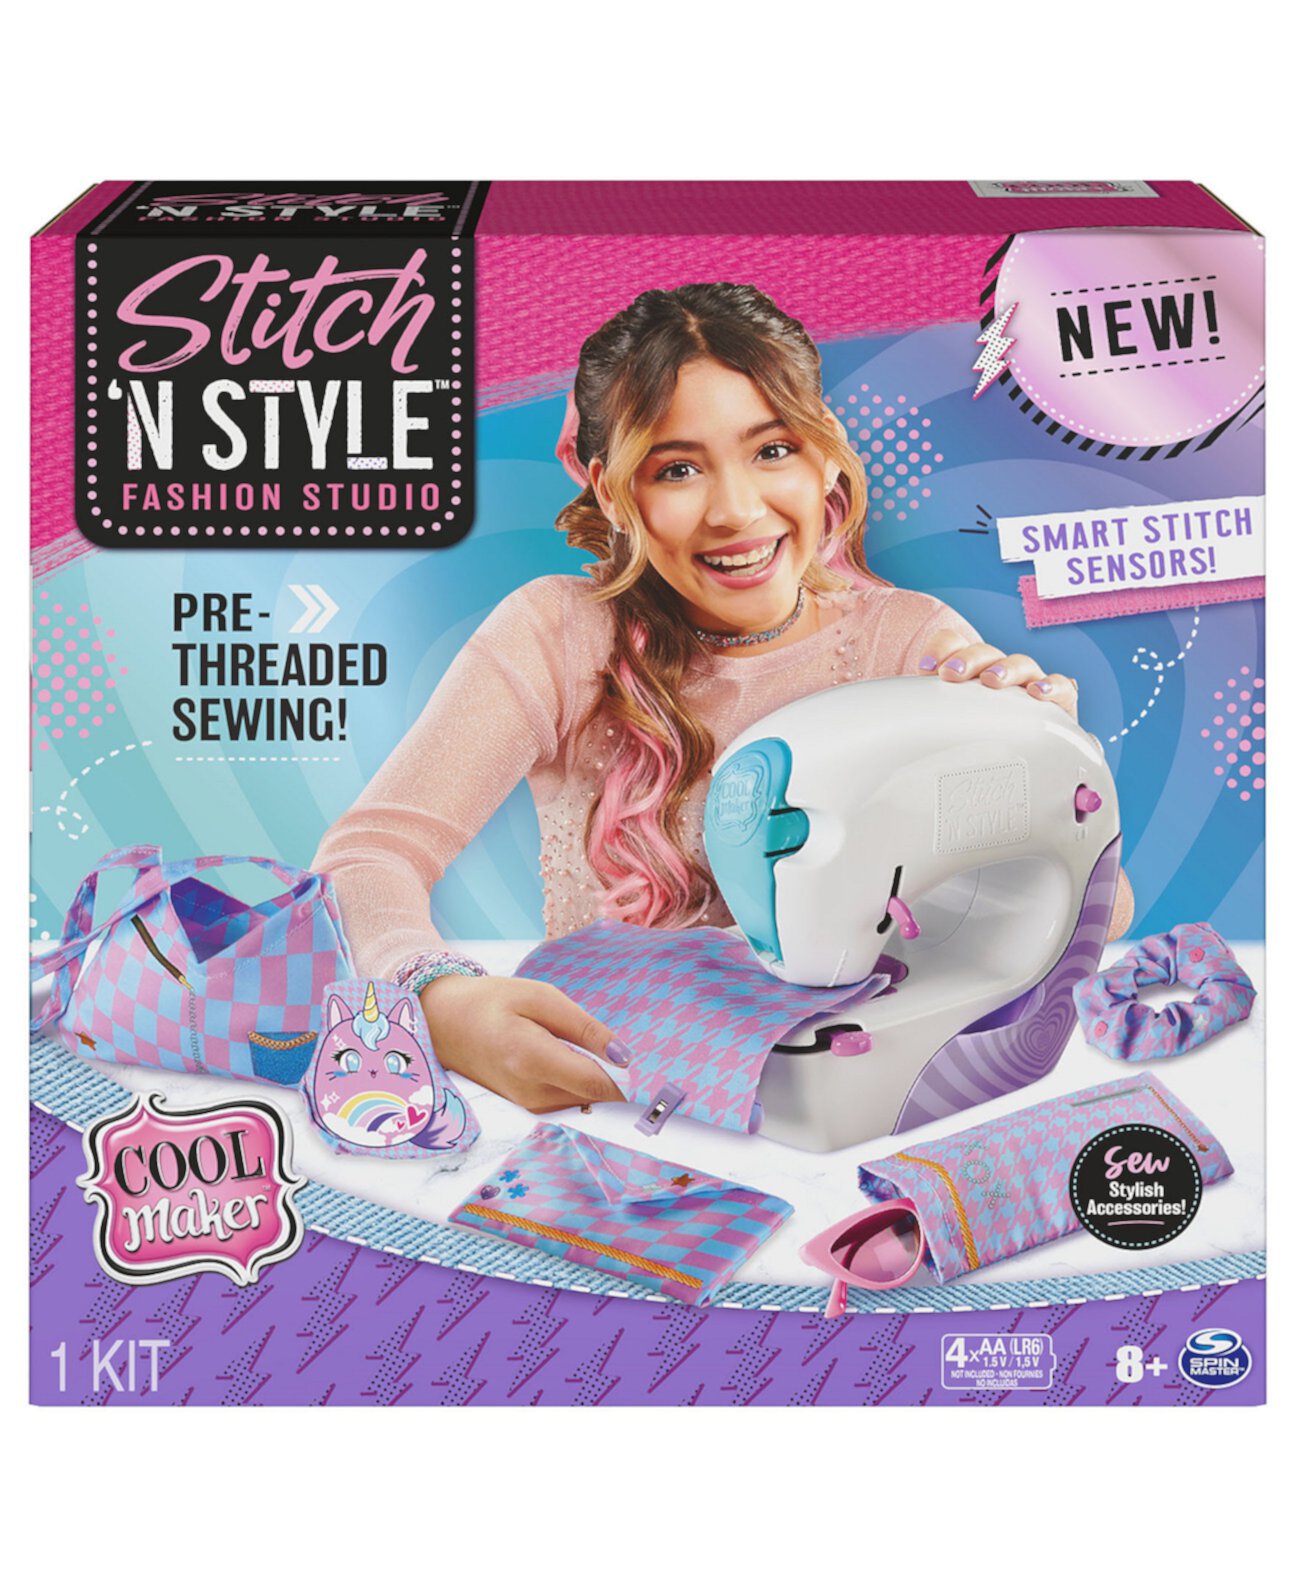 Stitch N Style Fashion Studio, Pre-Threaded Sewing Machine Toy with Fabric and Water Transfer Prints Cool Maker